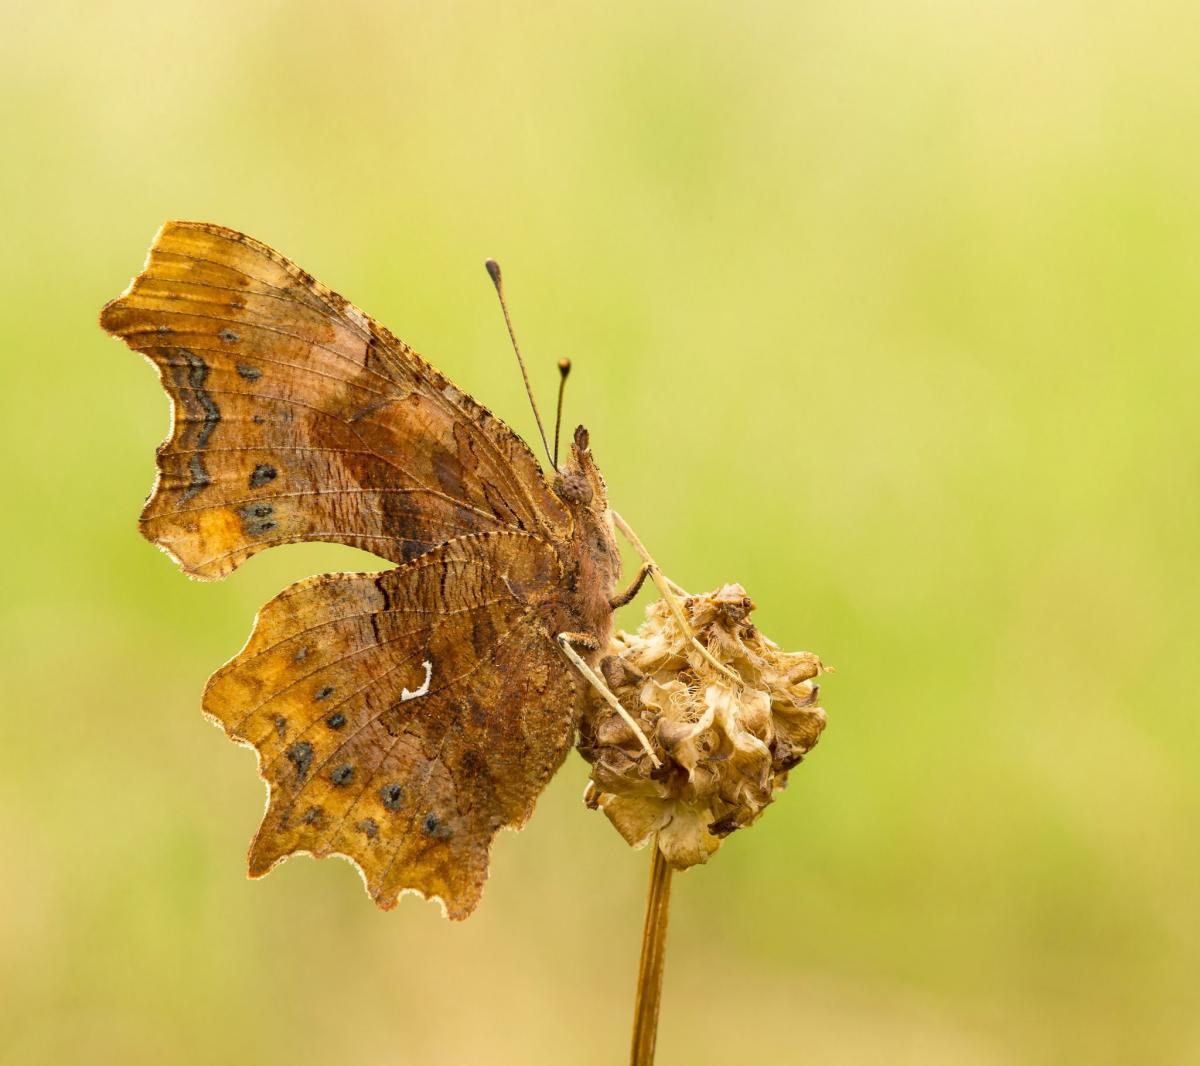 Keep your eyes peeled for this butterfly to flutter by! Conservationists urge people to take part in the Big Butterfly Count